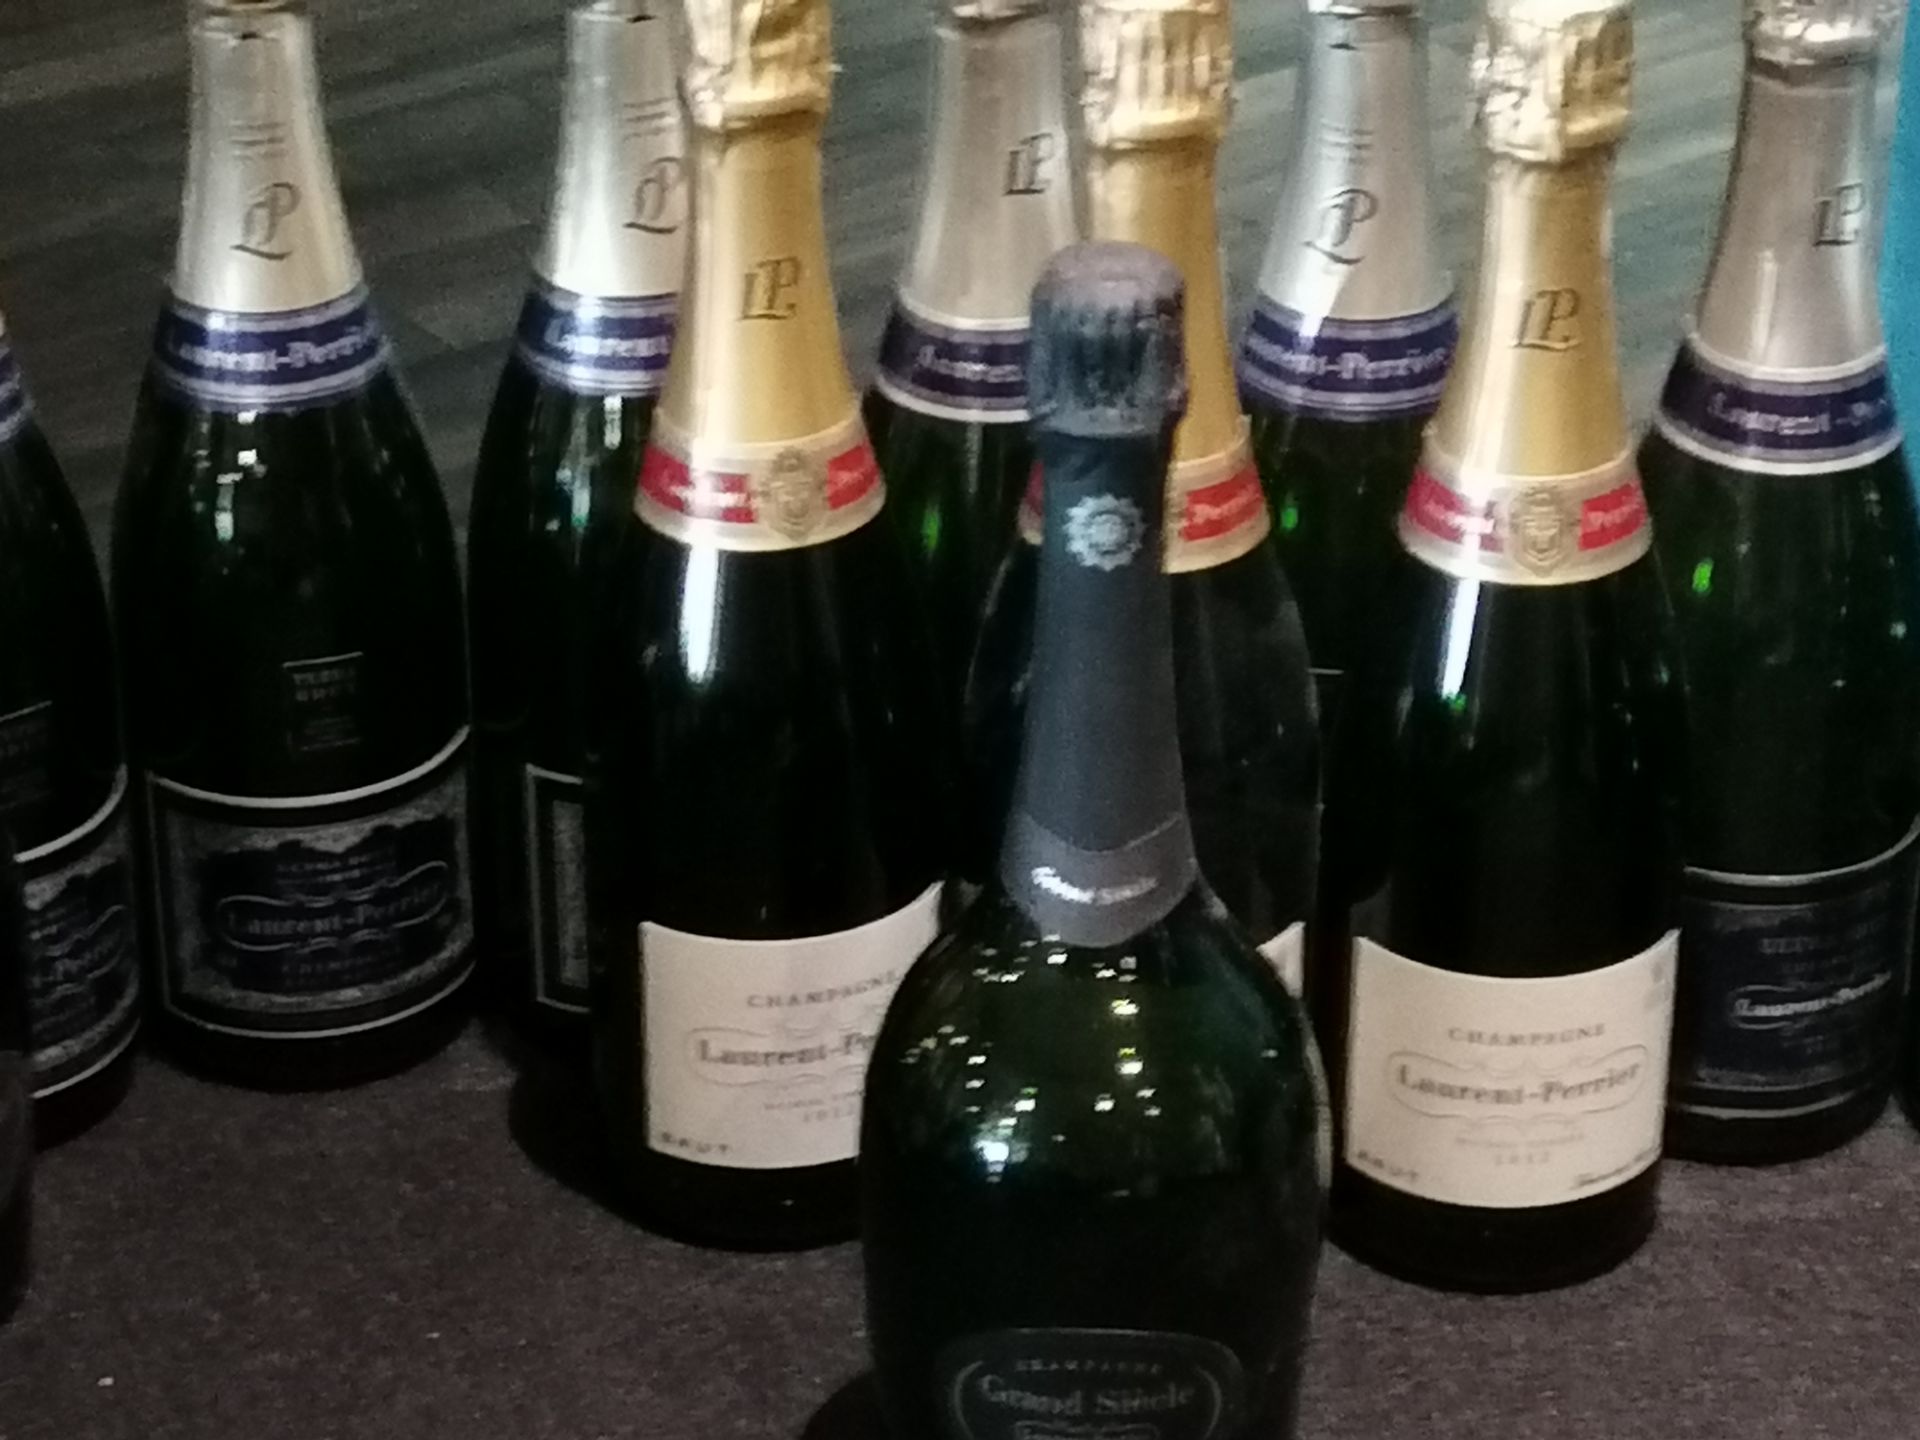 13 x Champagne display bottles - Image 3 of 3